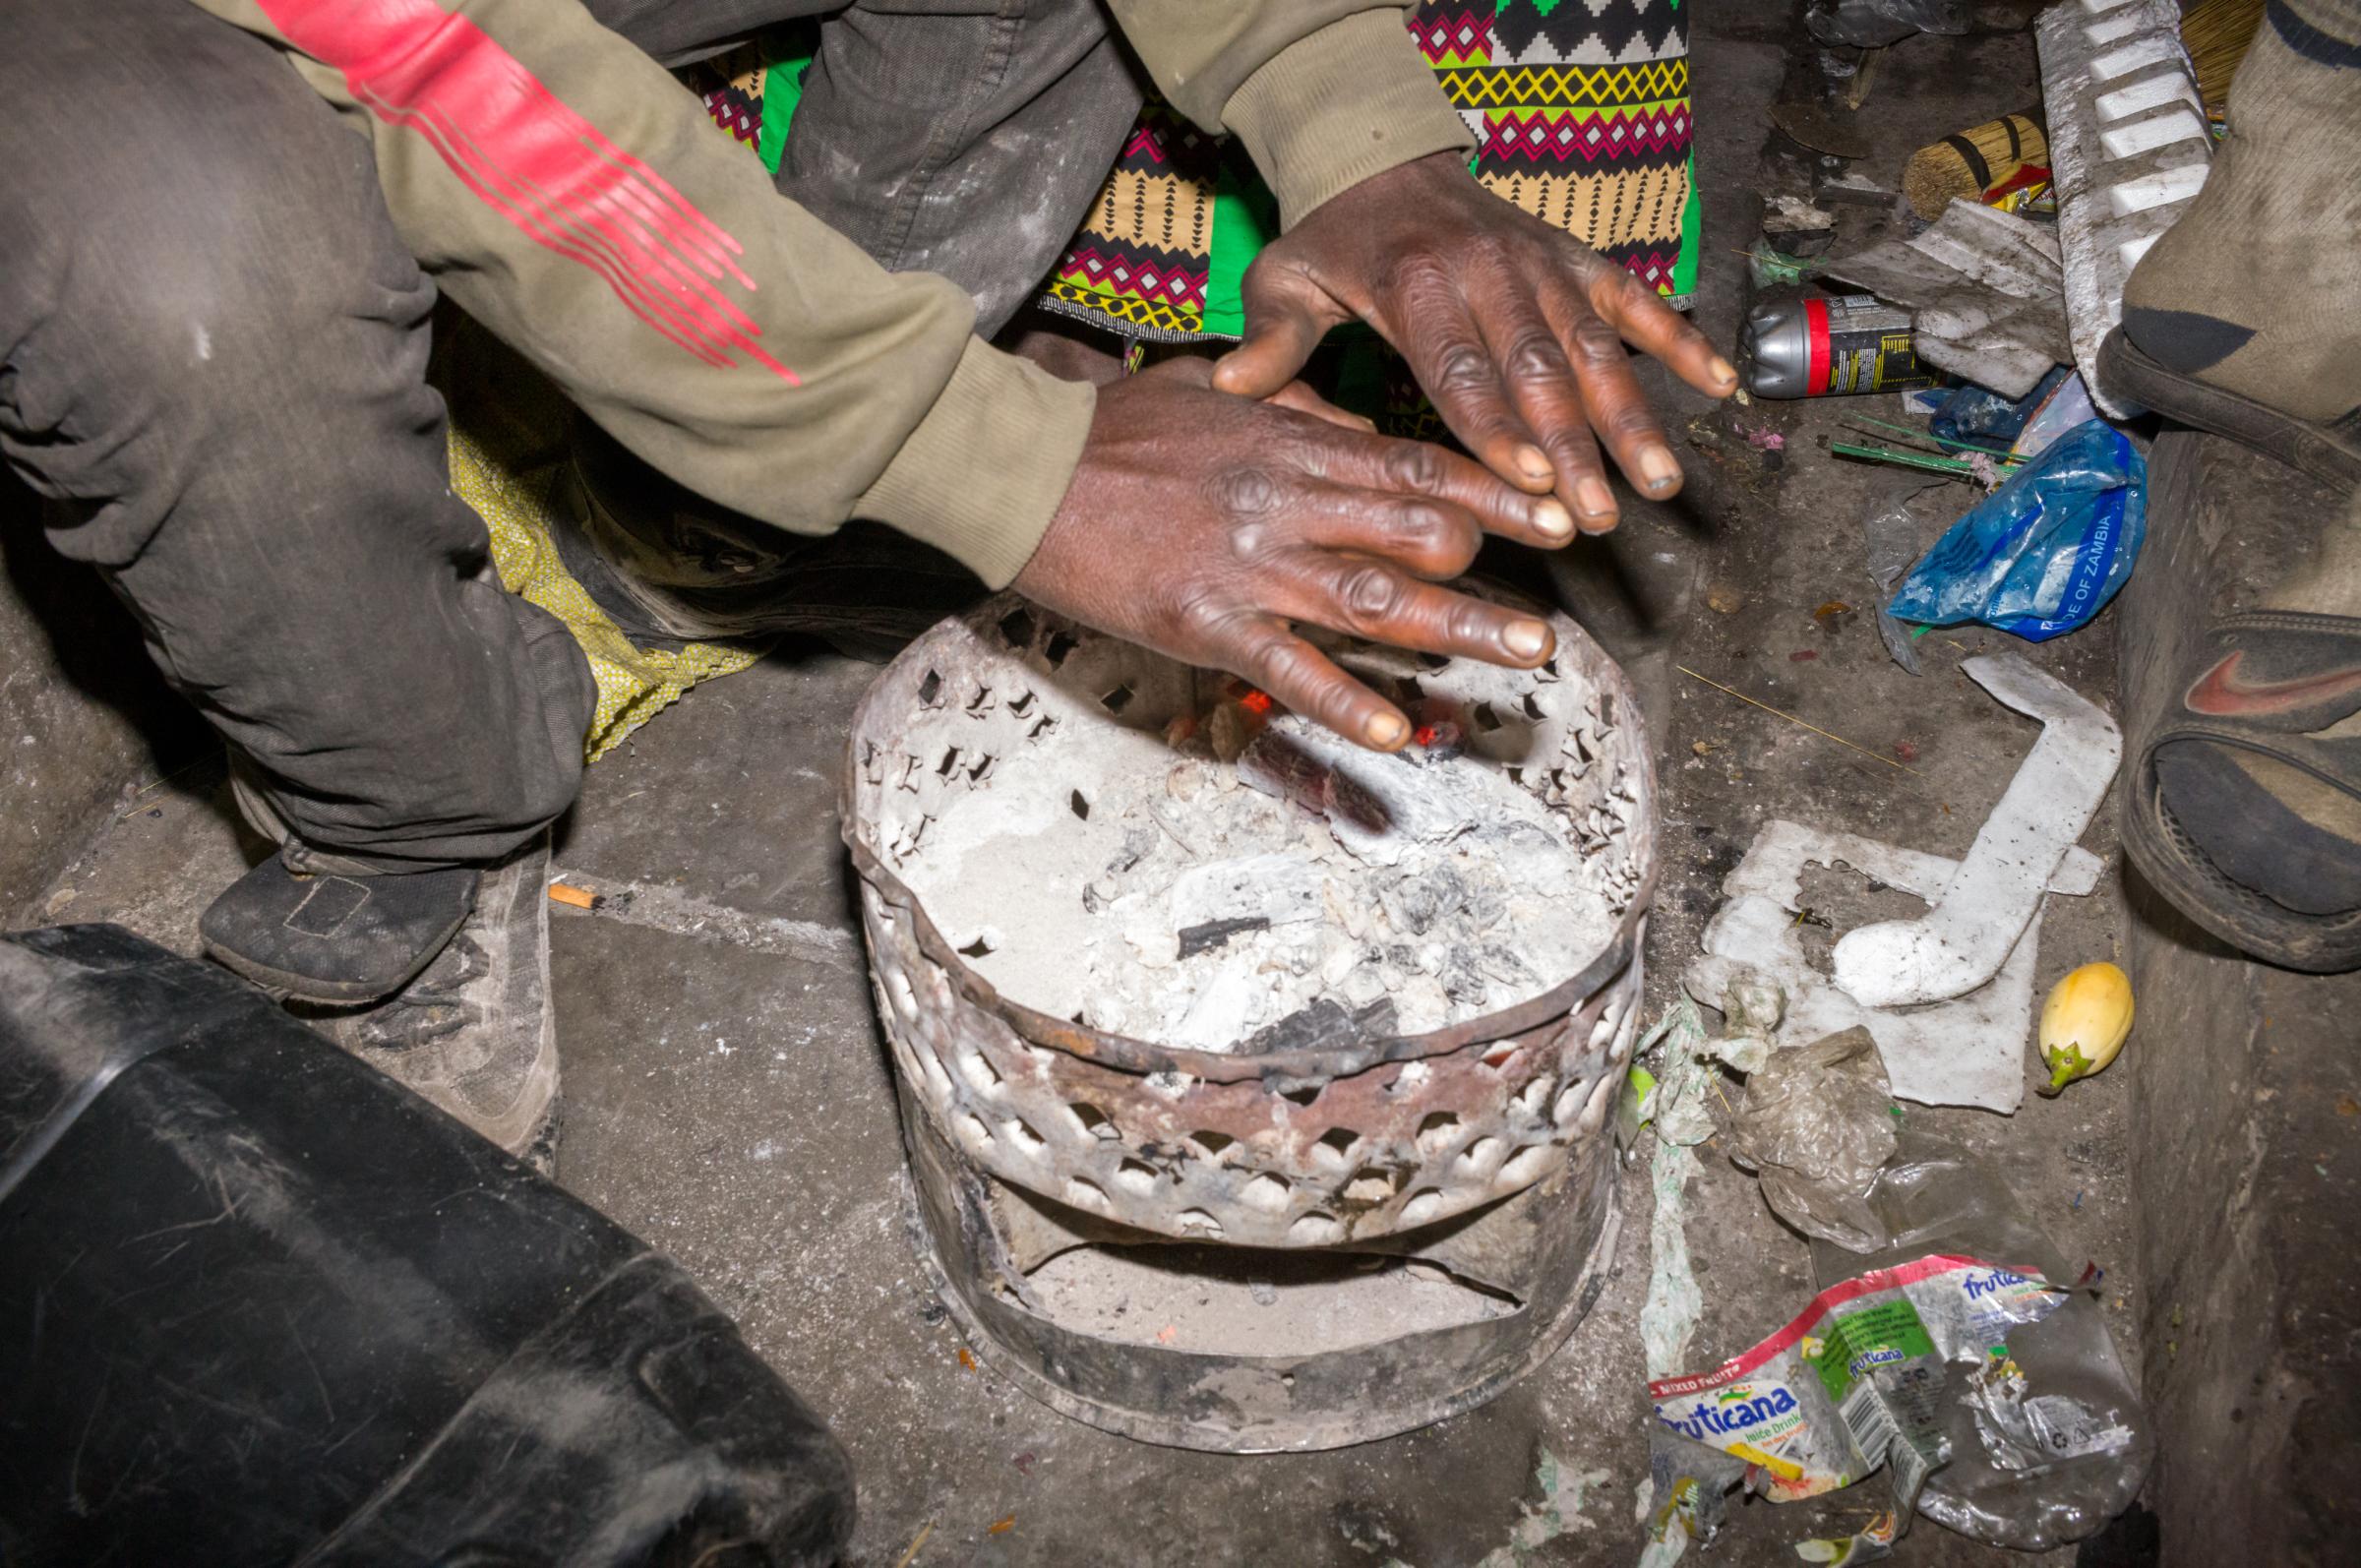 Life on the street in Lusaka - Keeping warm over the embers of the brazier, these hands could tell a story.